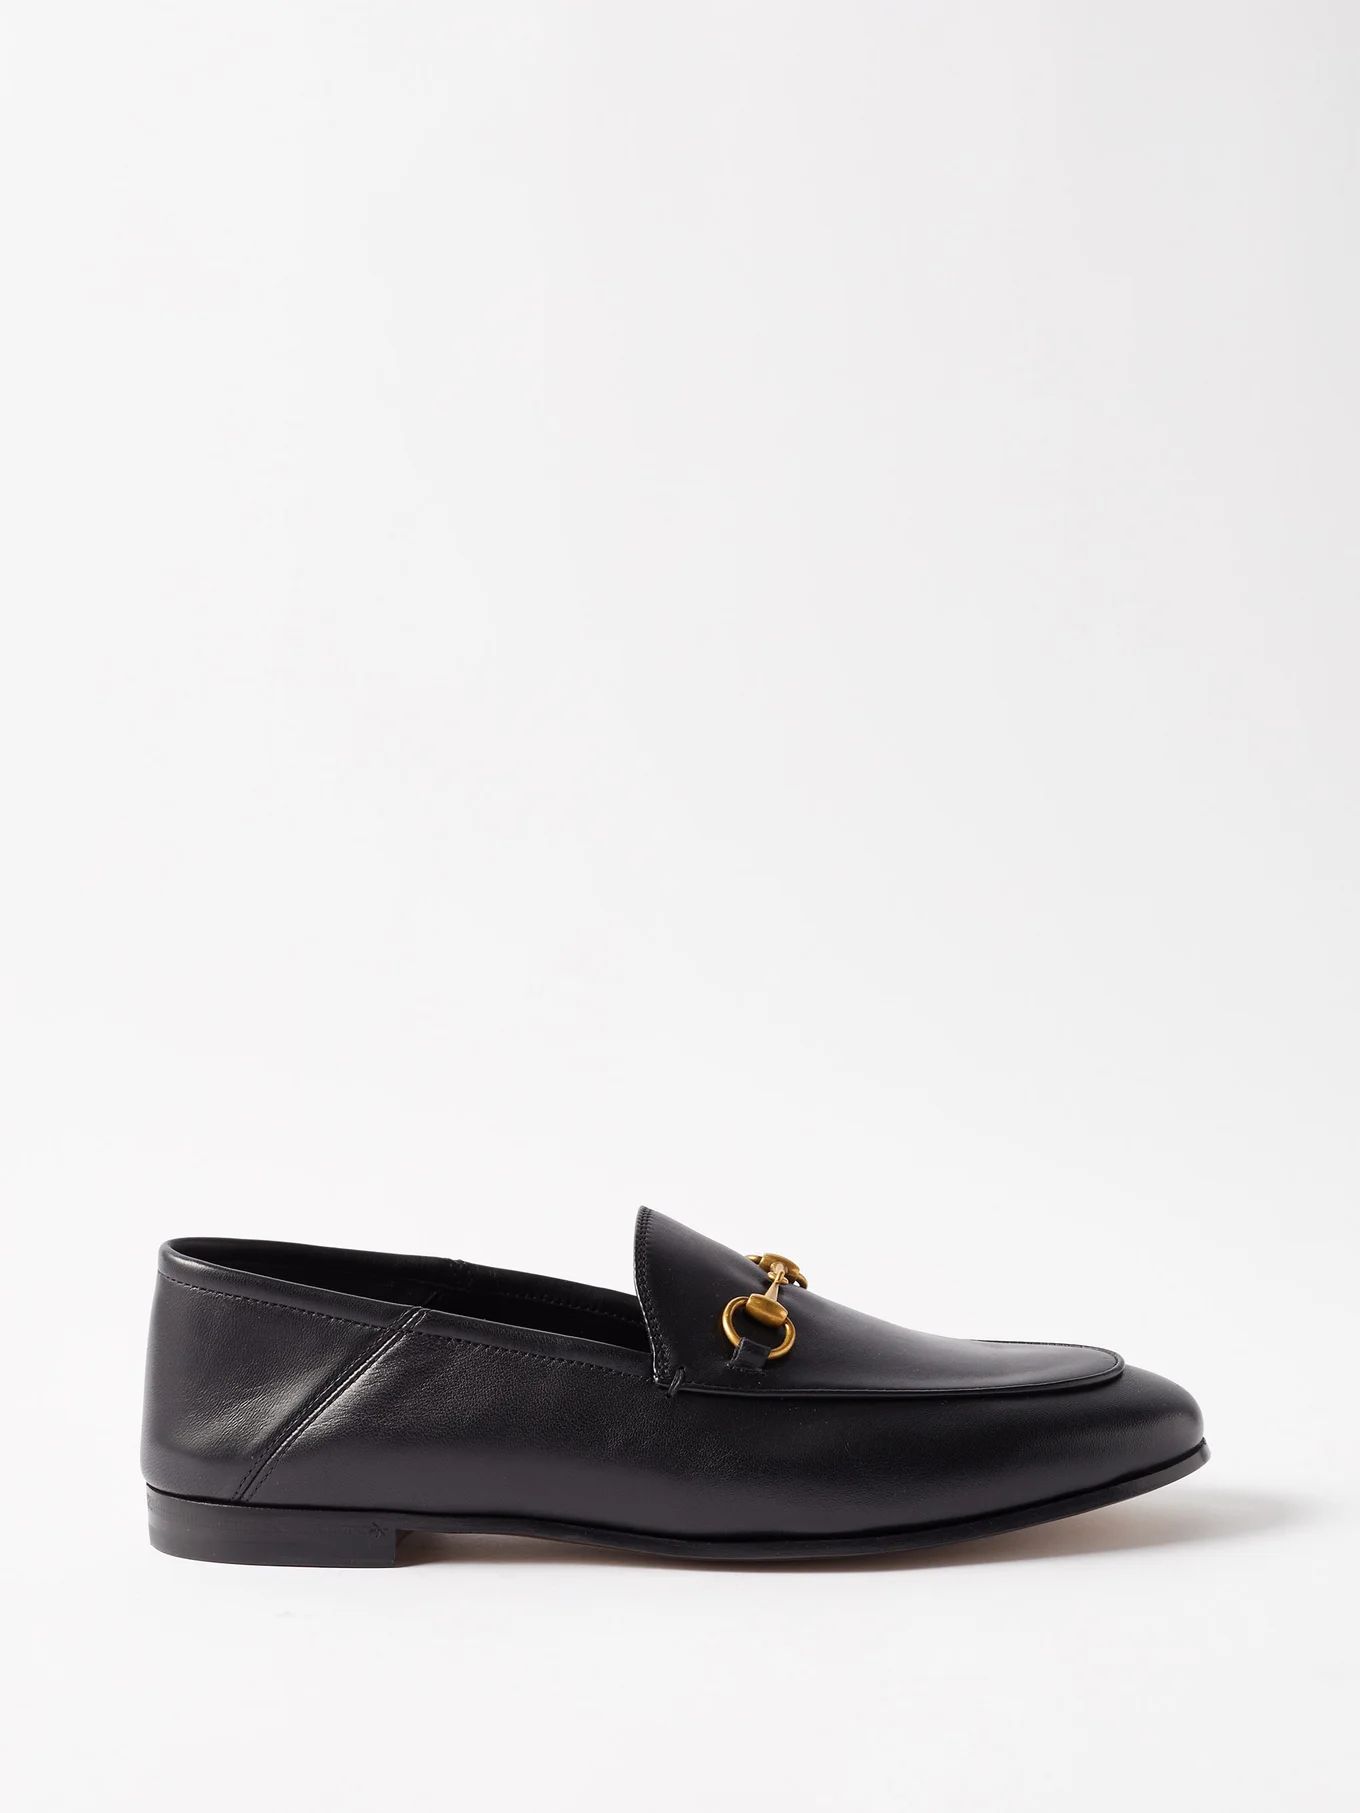 Brixton collapsible-heel leather loafers | Gucci | Matches (US)